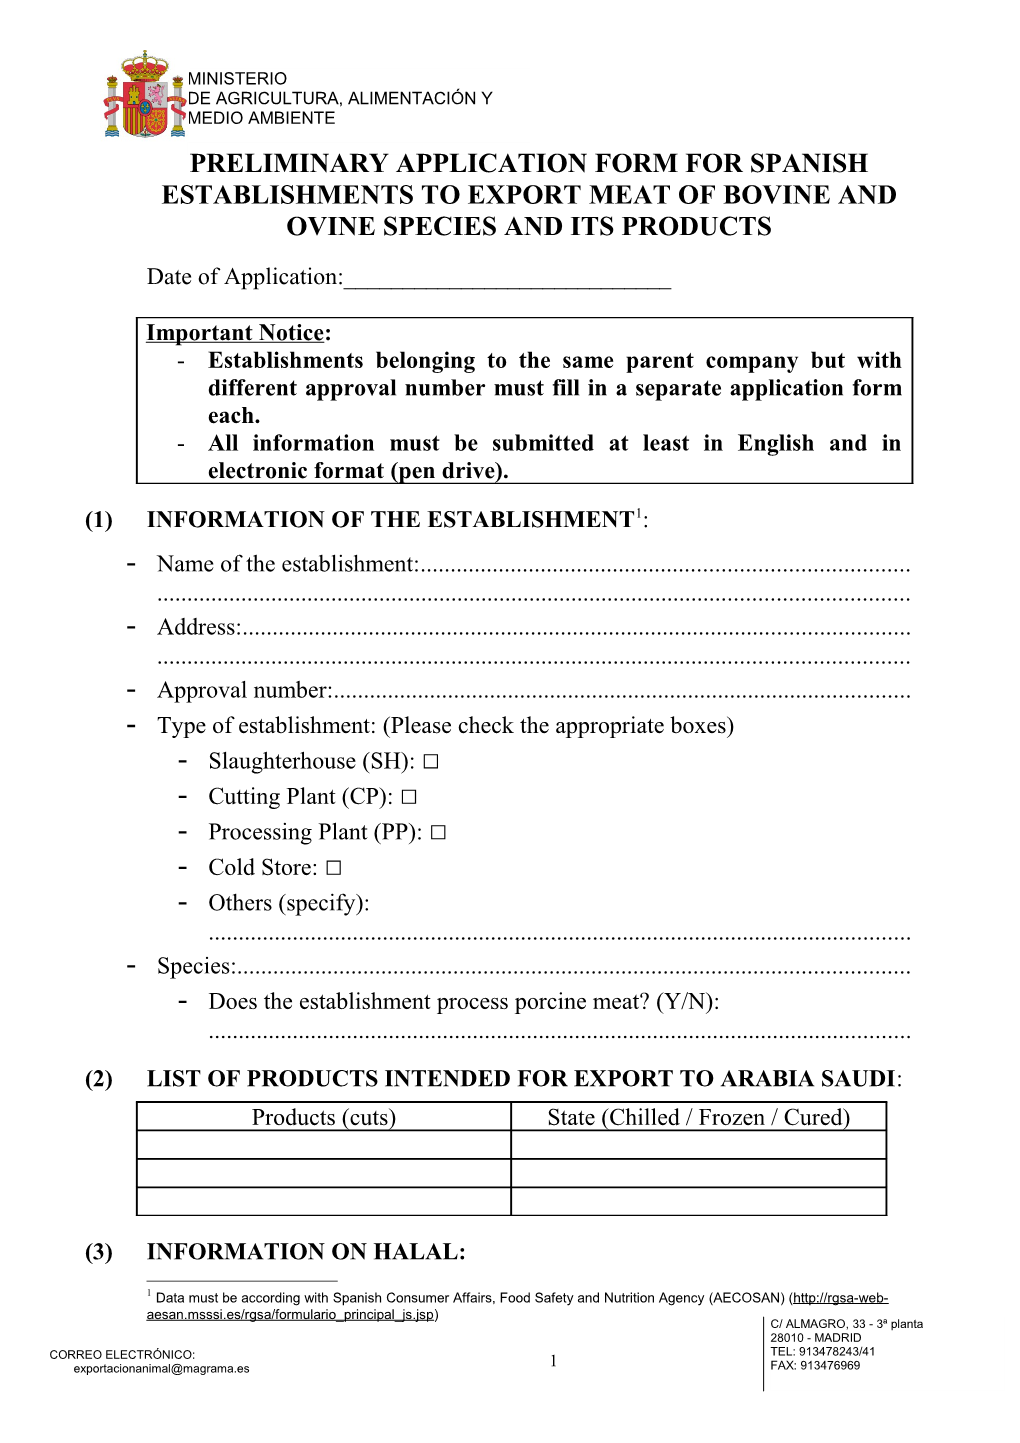 Preliminary Application Form for Spanish Establishments to Export Meat of Bovine and Ovine